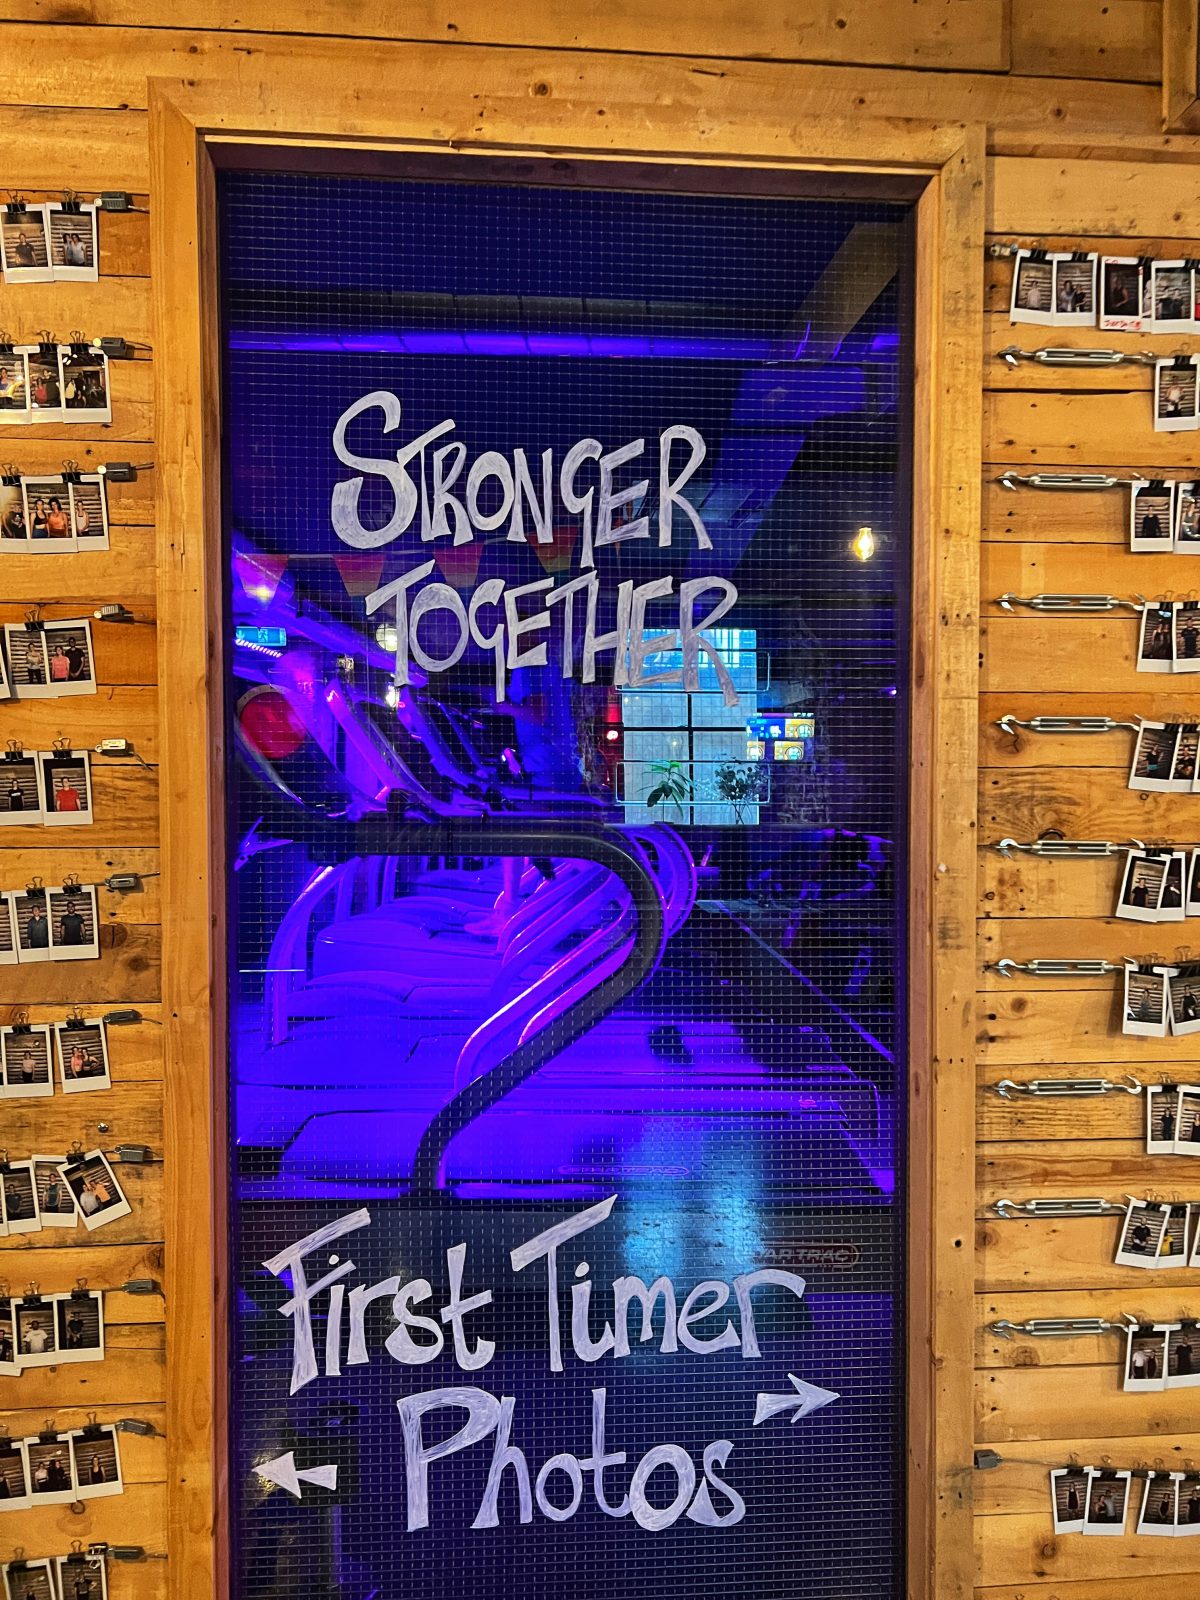 sign that says 'stronger together' and 'first time photos'.